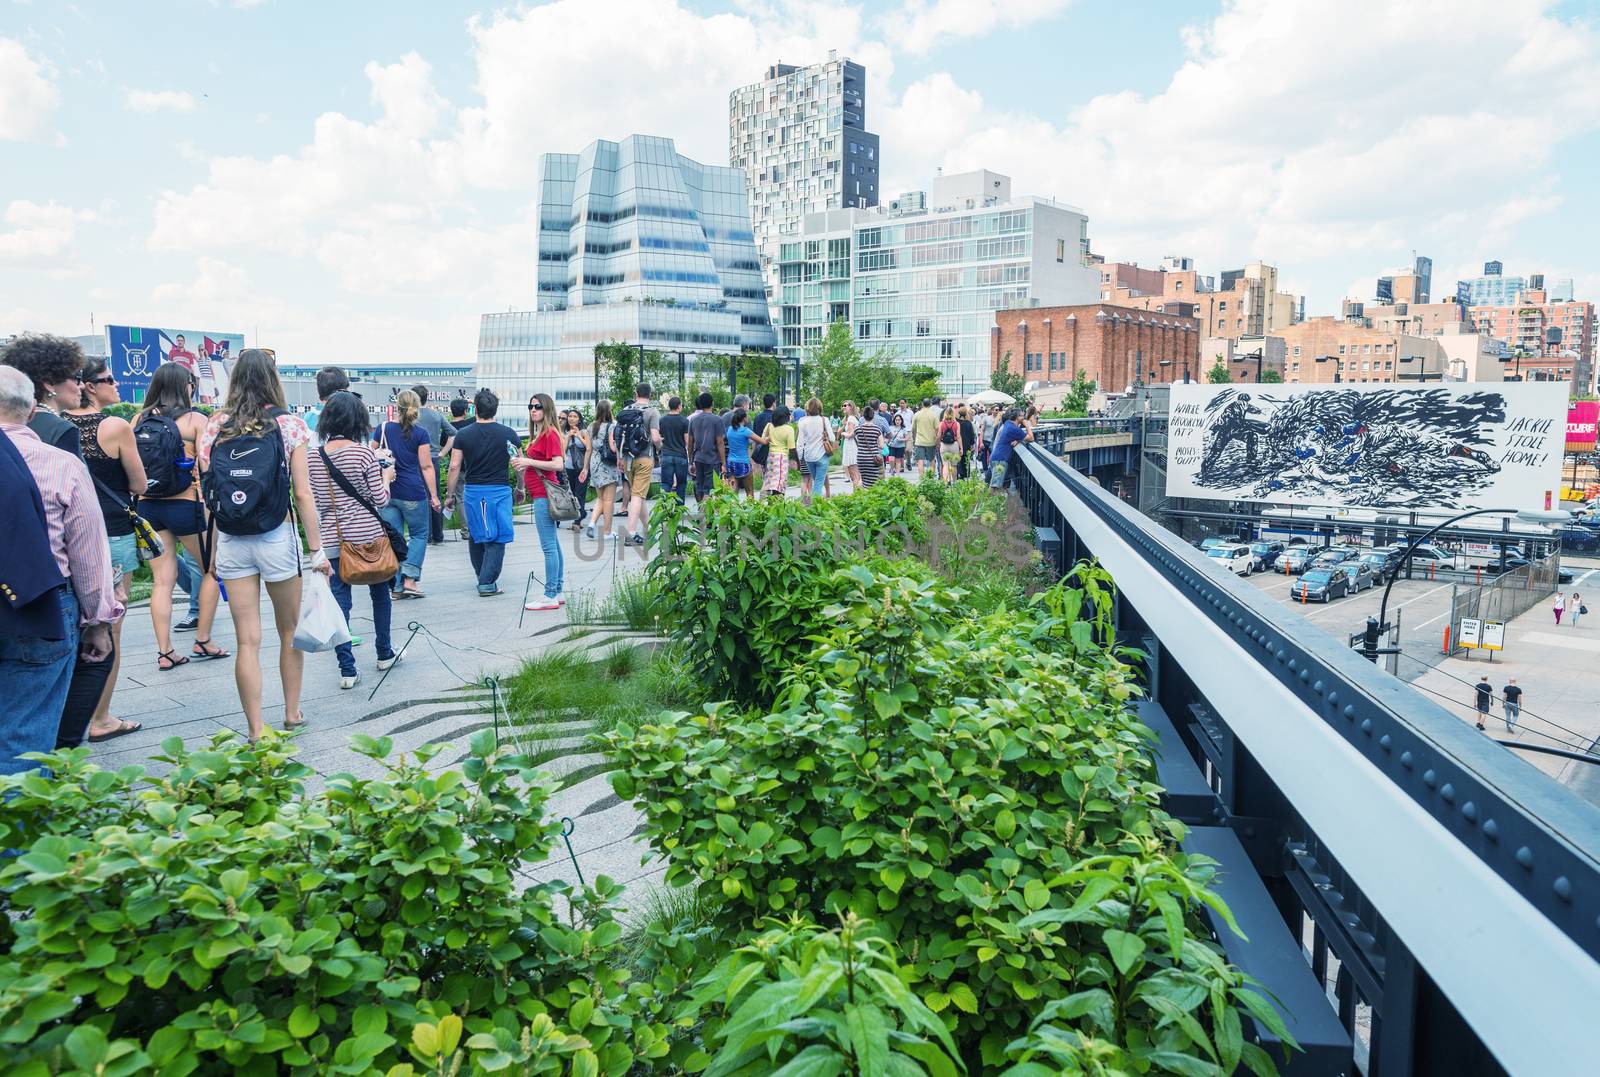 NEW YORK - CIRCA MAY 2013: The High Line Park, New York, circa May 2013. The High Line is a popular linear park built on the elevated train tracks above Tenth Ave in New York City